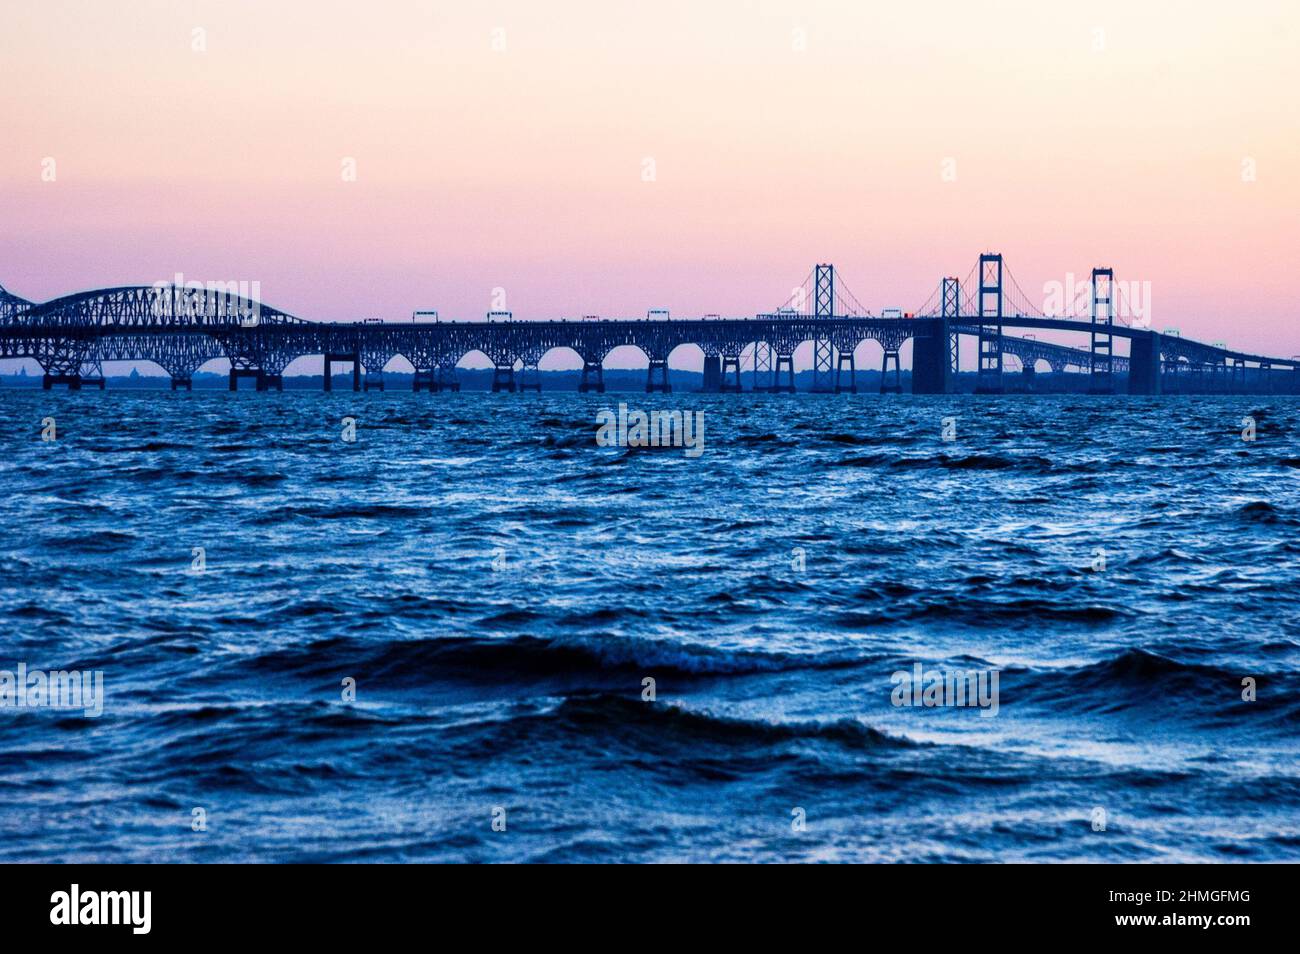 The Chesapeake Bay bridge is a major dual-span bridge in Maryland connecting the rural Eastern Shore with the urban Western. Stock Photo